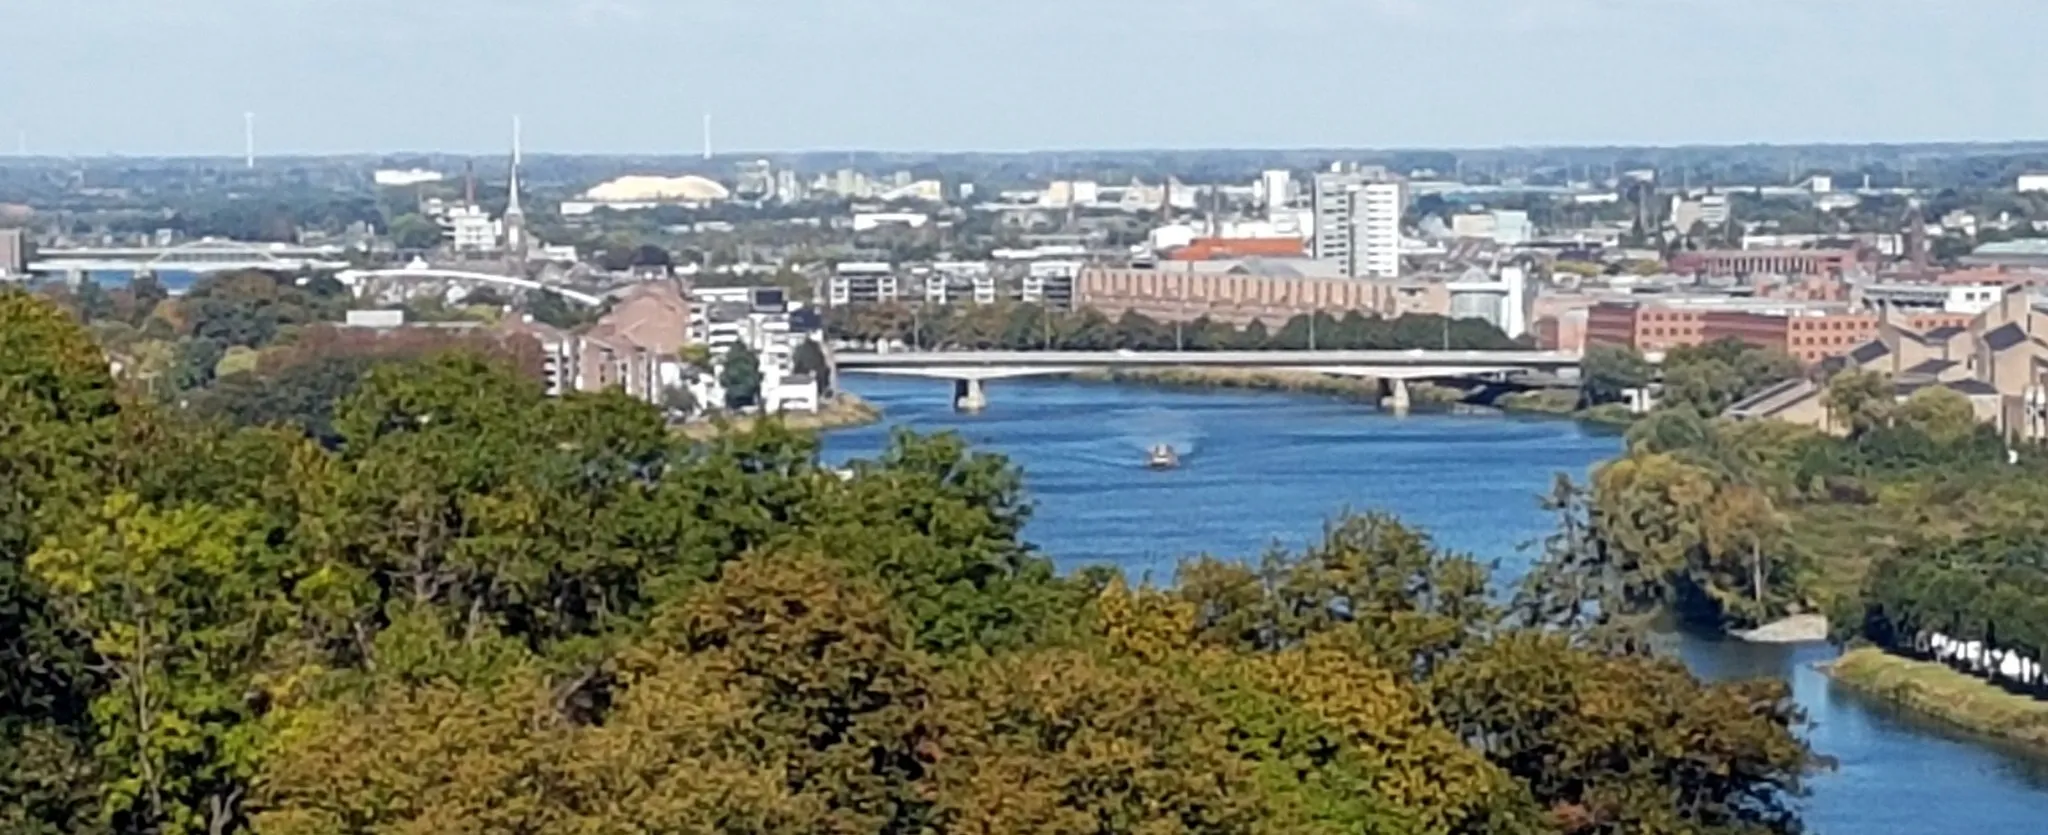 Image of Maastricht